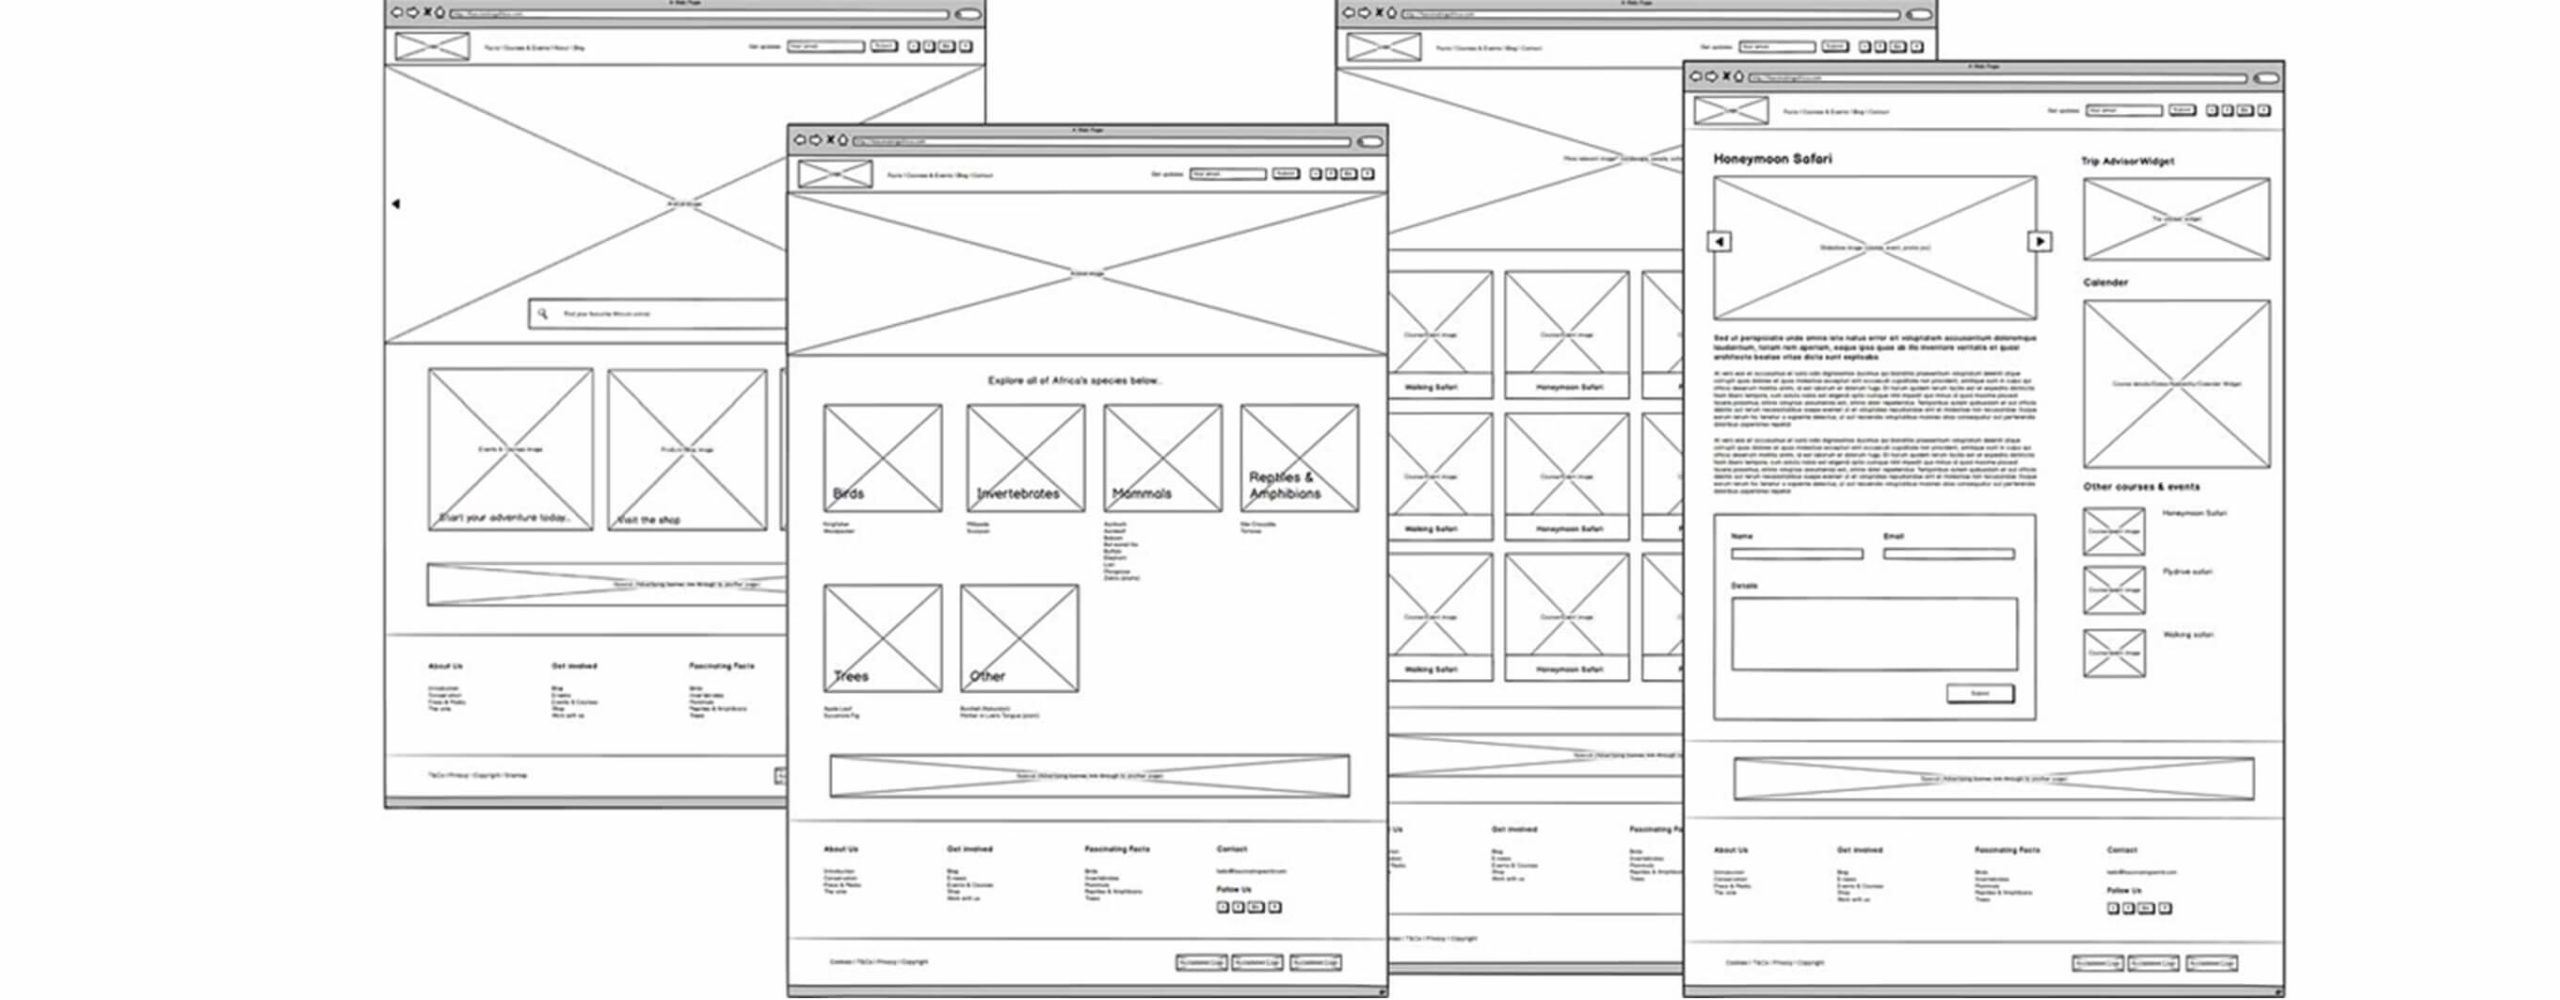 5 Common Wireframing Issues to Avoid